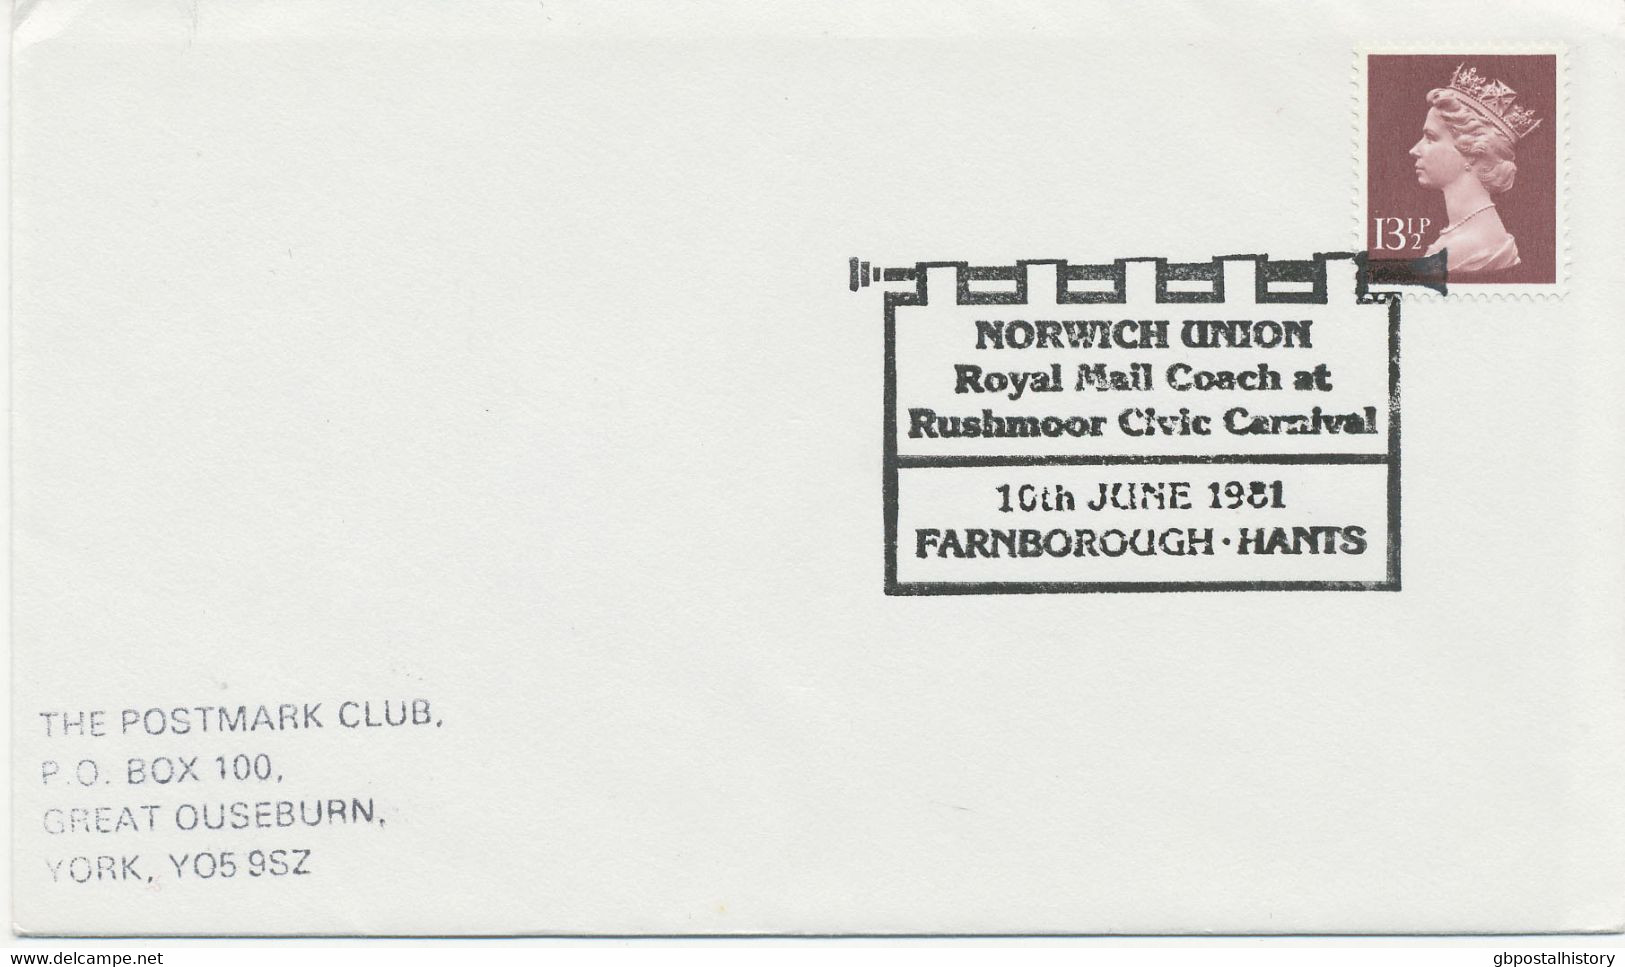 GB SPECIAL EVENT POSTMARK NORWICH UNION - Royal Mail Coach At Rushmoor Civic Carnival - 10th JUNE 1981 - FARNBOROUGH - H - Stage-Coaches